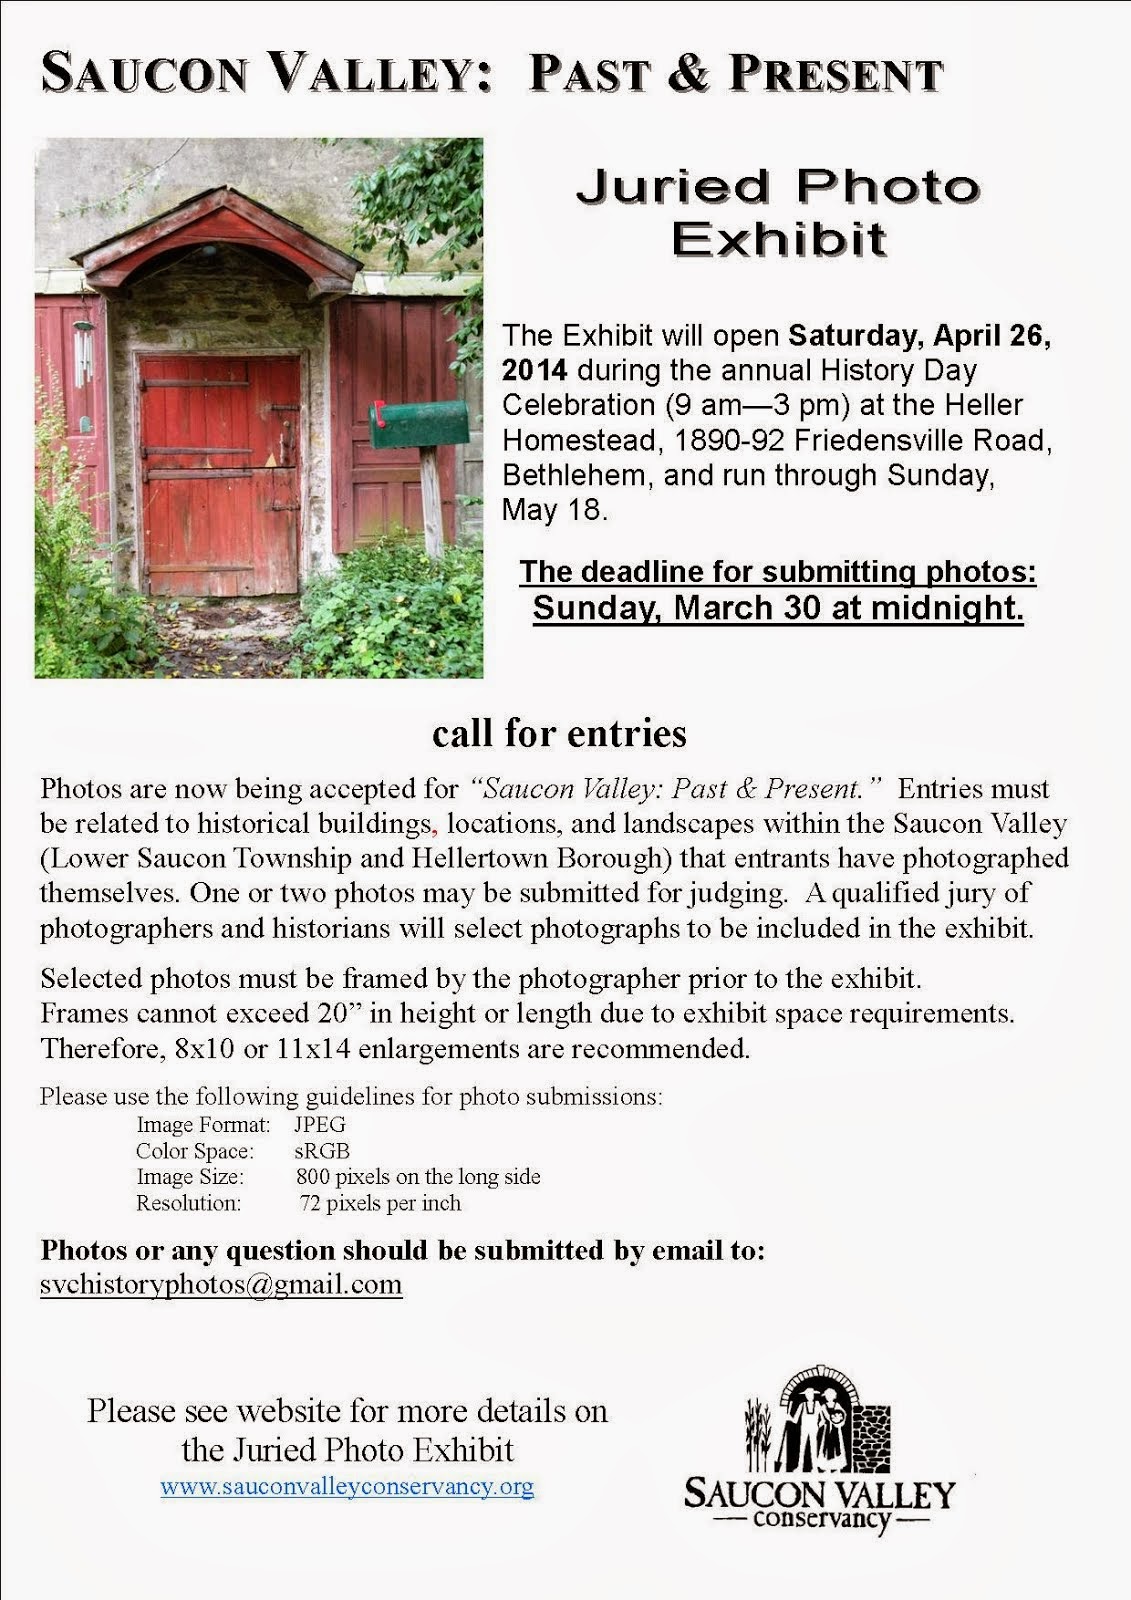 Saucon Valley: Past & Present Juried Photo Exhibit Call for Entries - Deadline - March 30